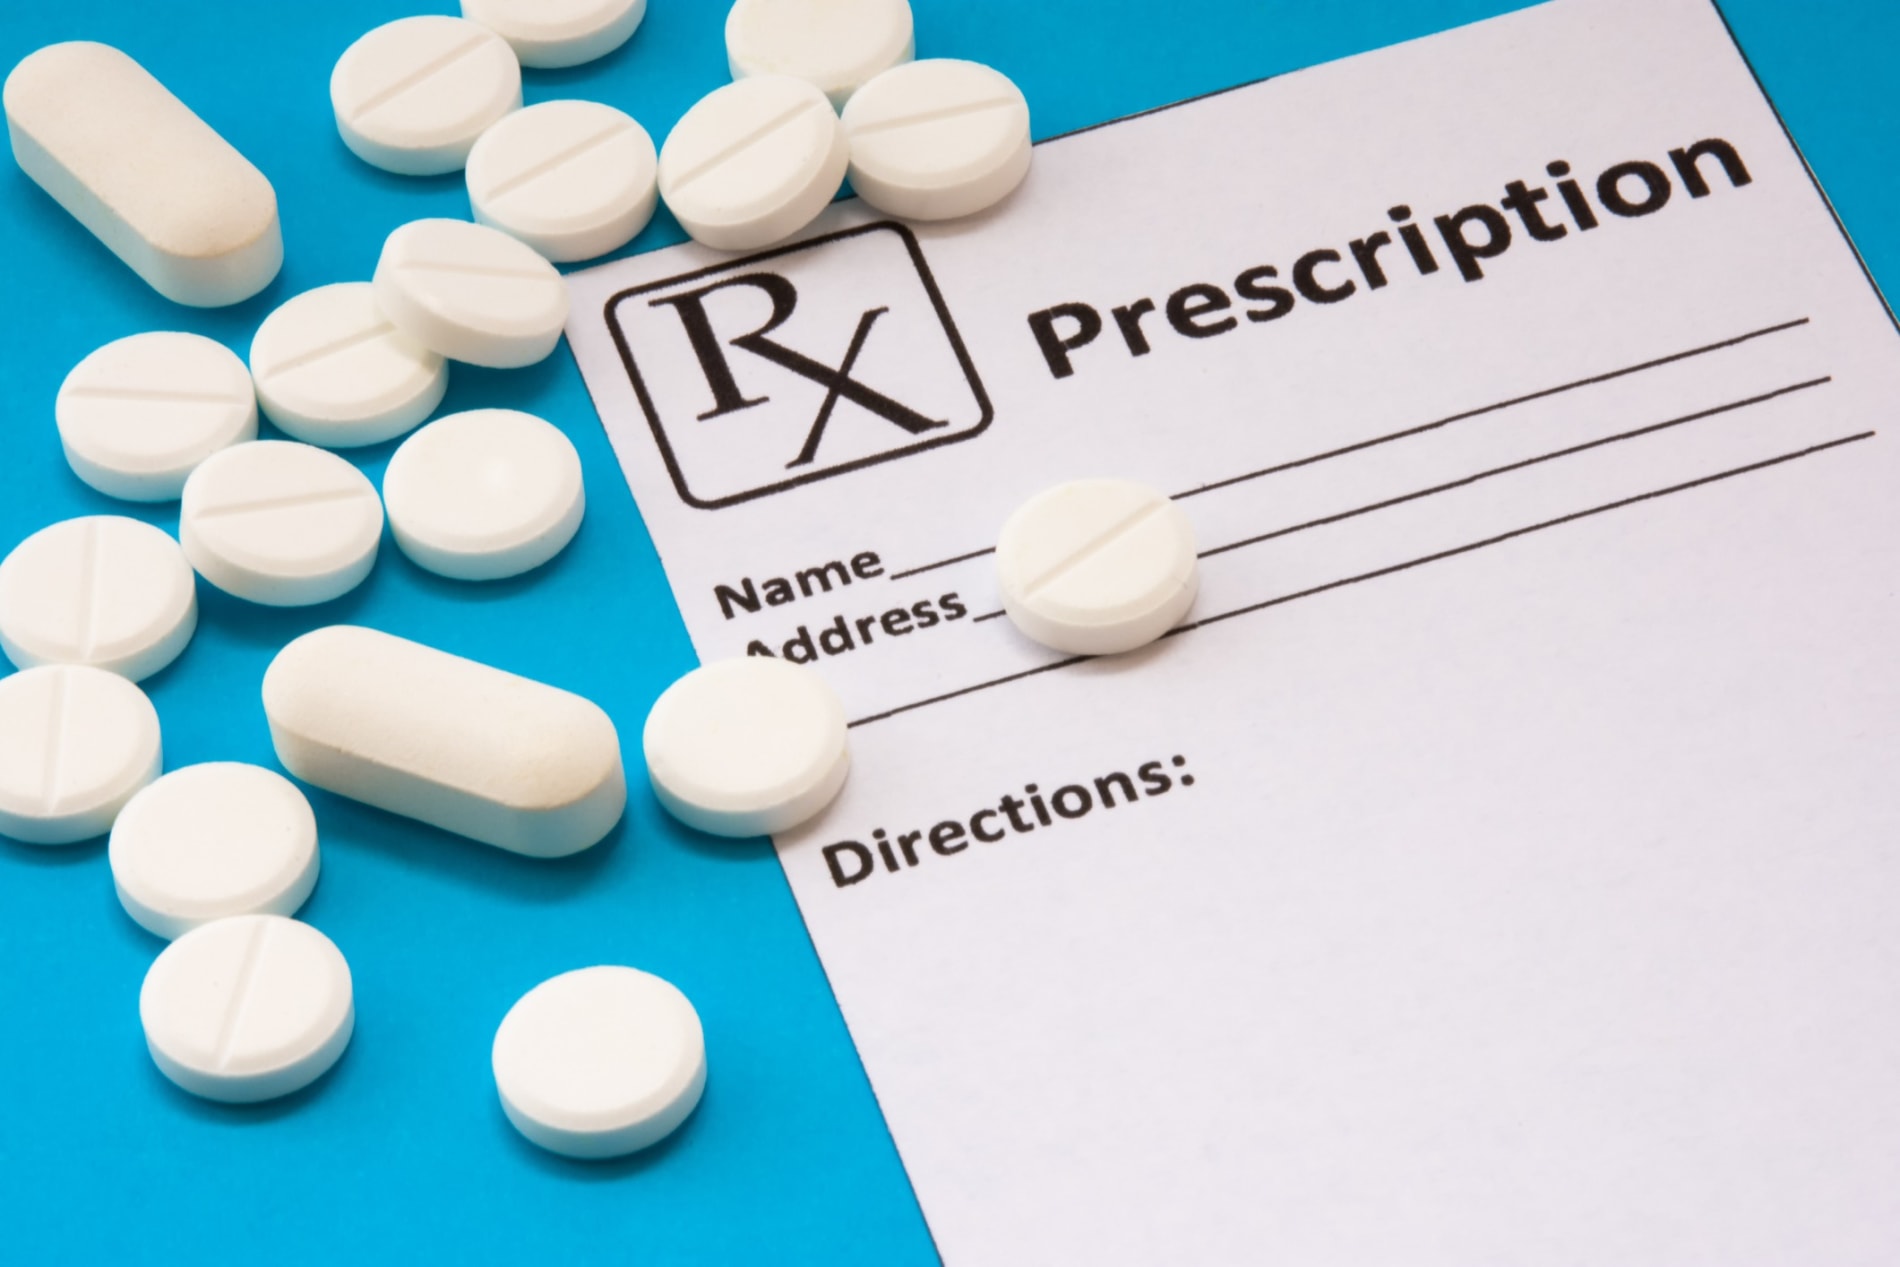  prescription pad is near scattered white pills and tablets on a blue background.